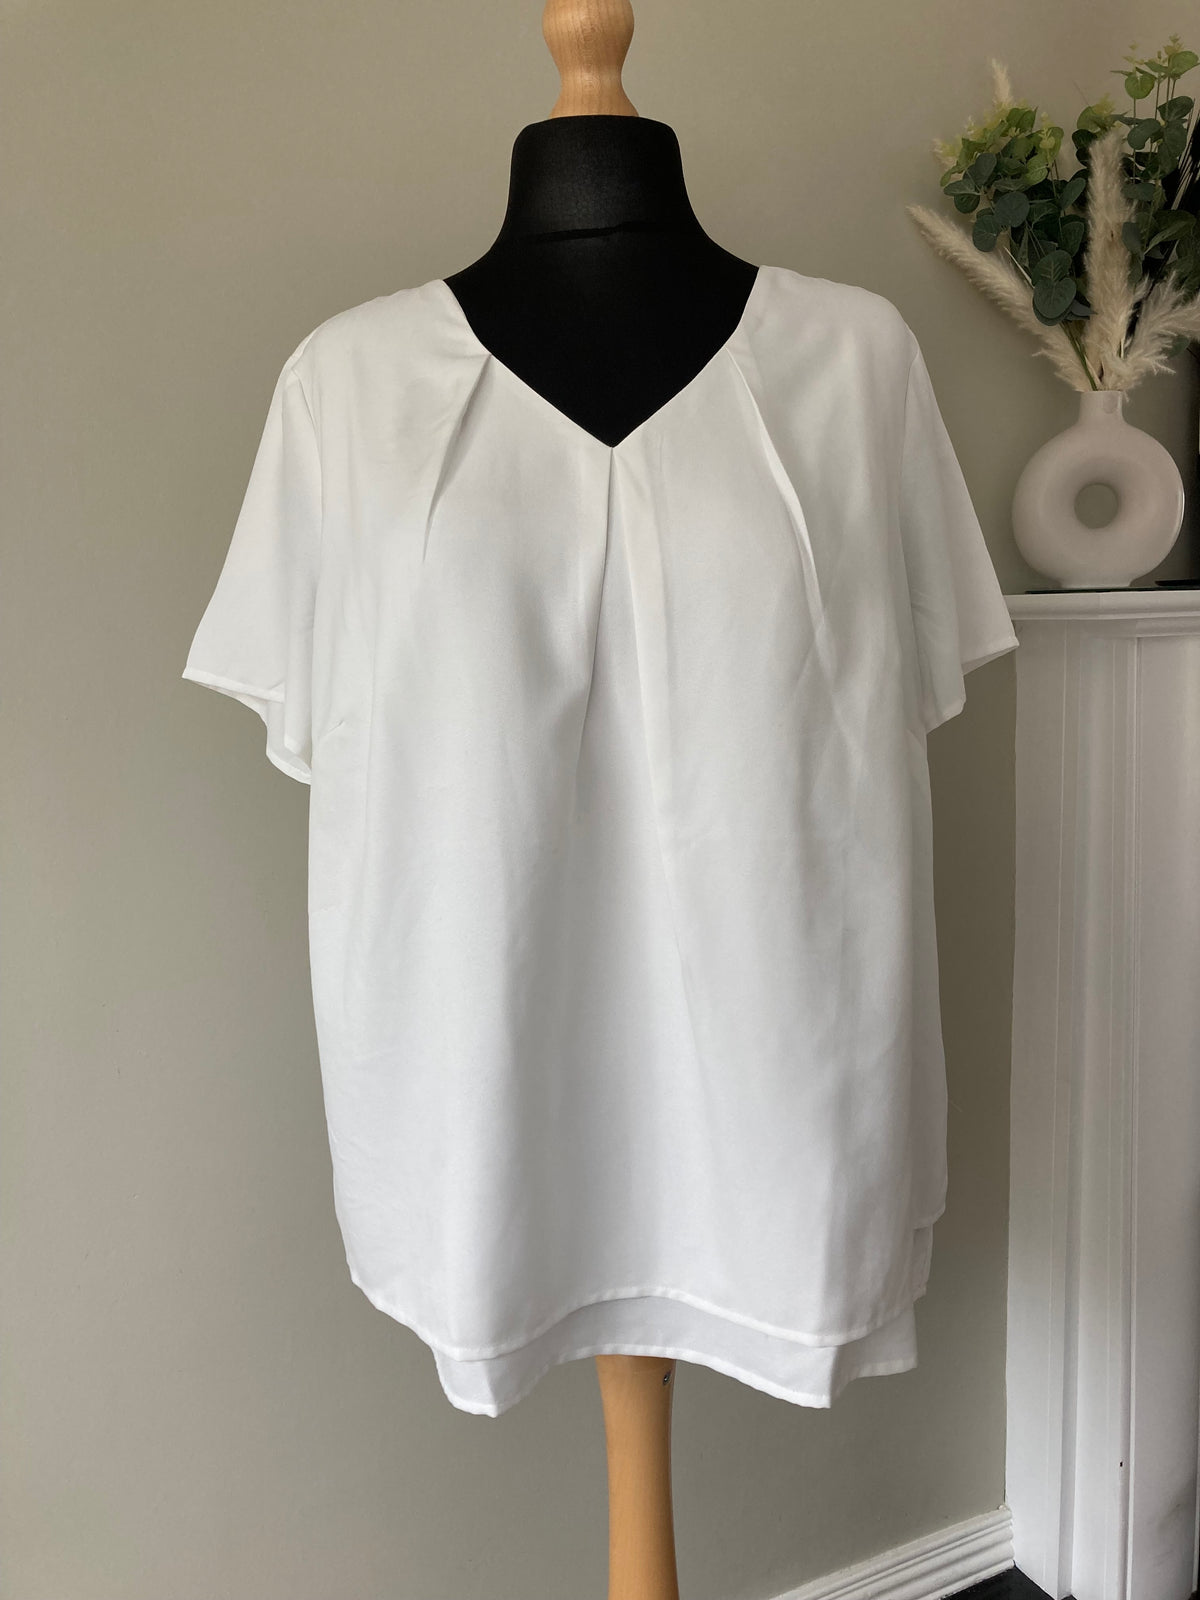 C Neck Layered Blouse by CREATION - Size 24 & 22